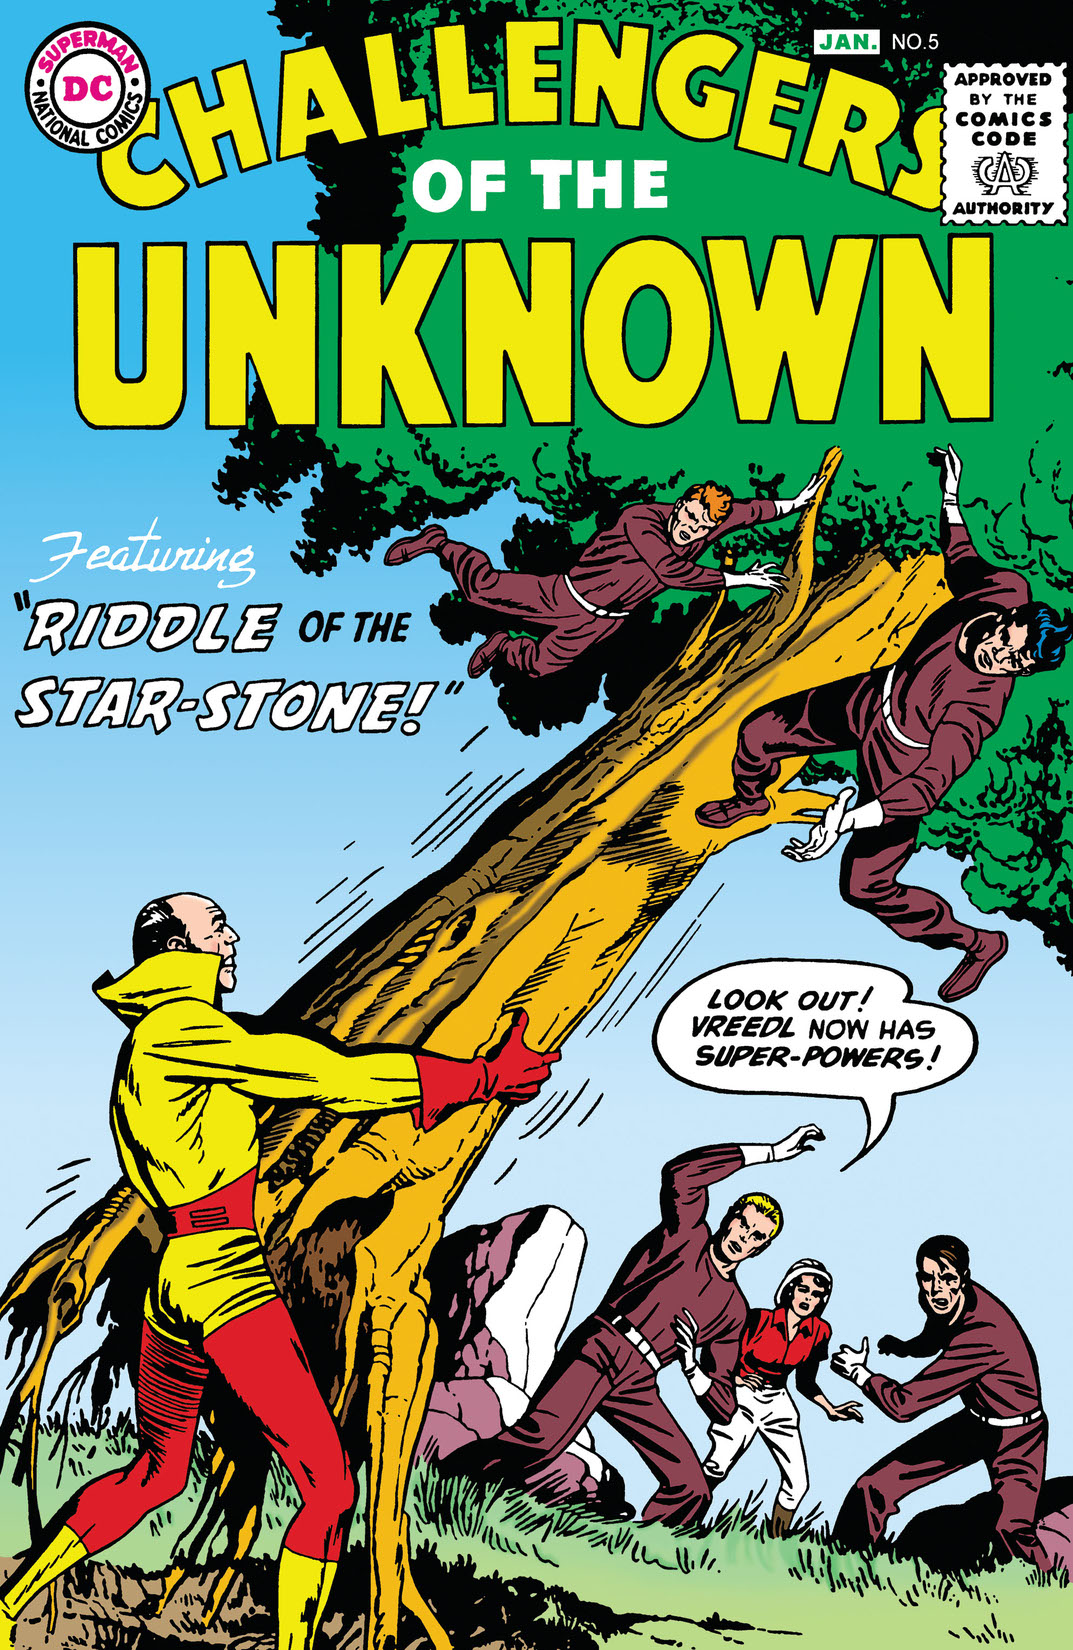 Challengers of the Unknown (1958-) #5 preview images